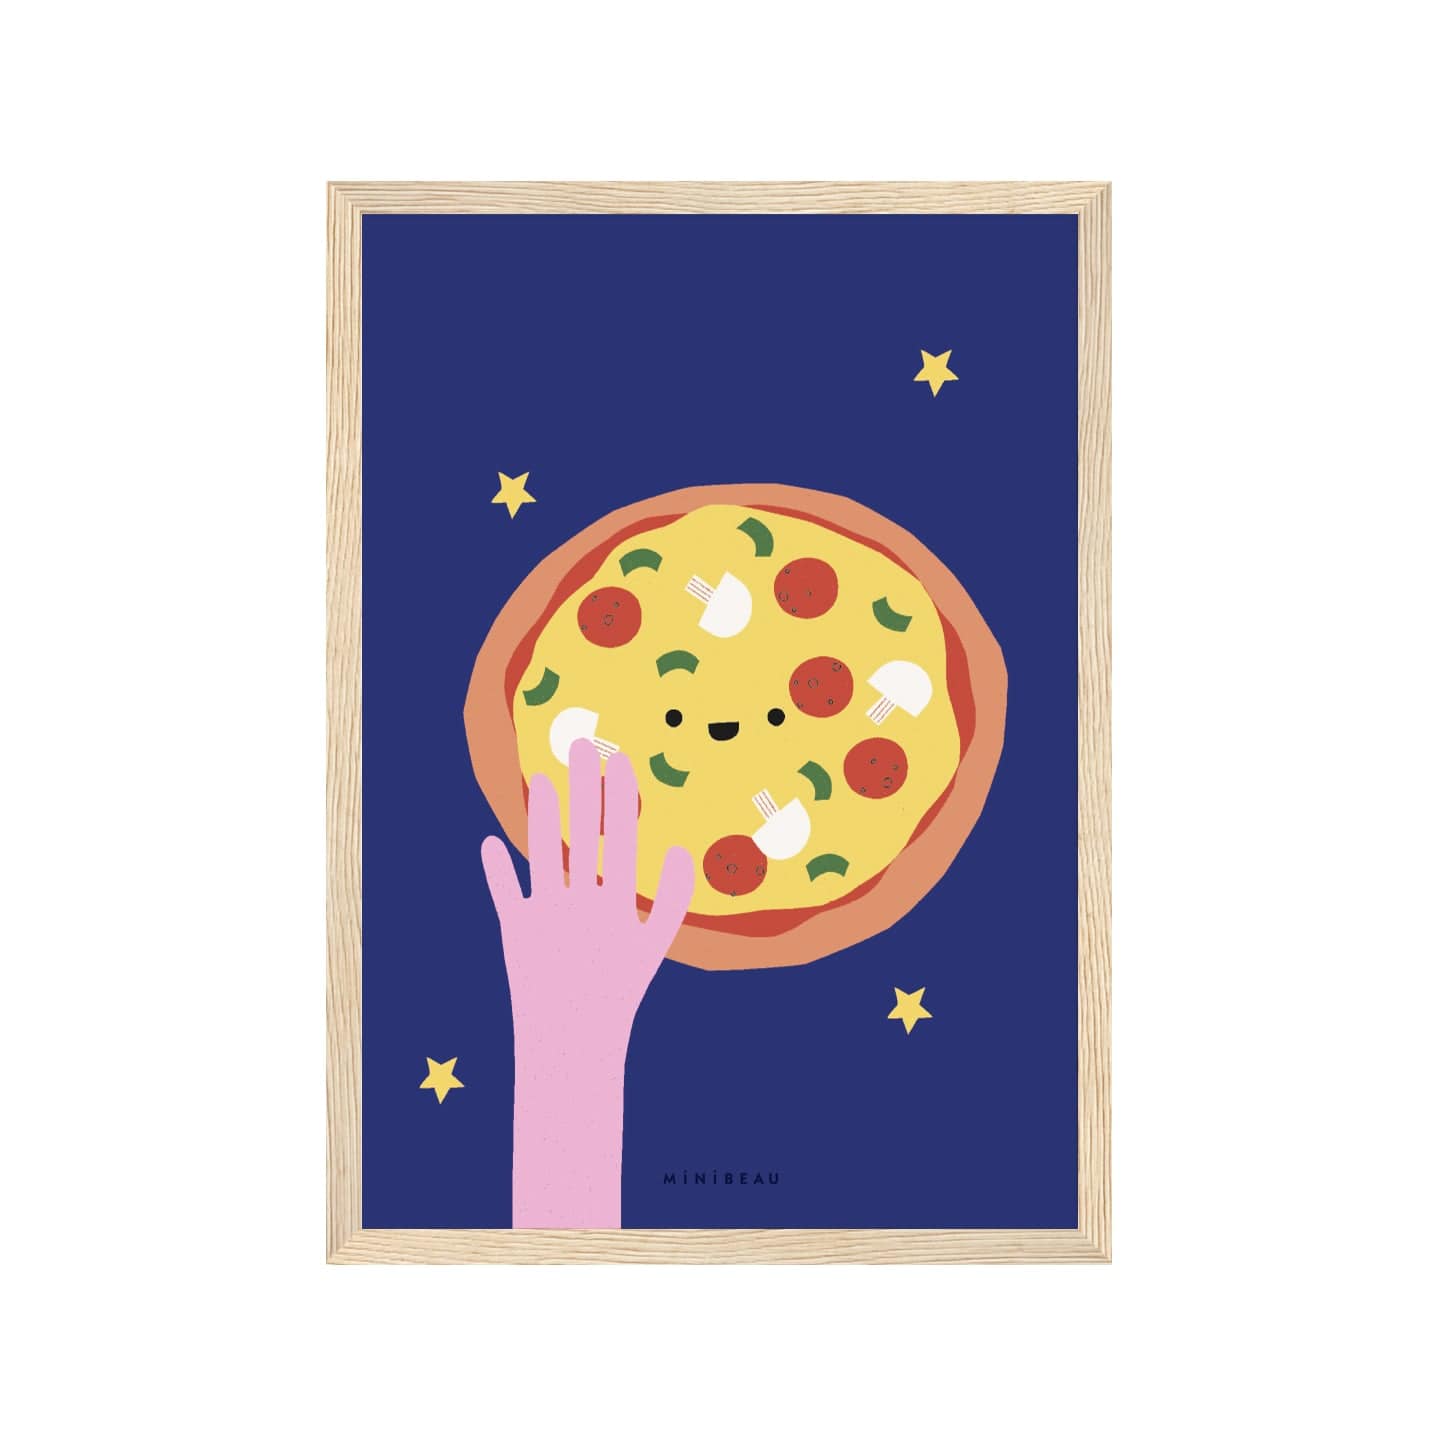 Art print in light wood frame. Our Happy Alphabet 'P' Art Print shows a smiling pizze with a hand reaching towards it, creating a P shape. Pizza has green pepper, pepperoni and mushrooms on it. All on a dark blue background with four small yellow stars.